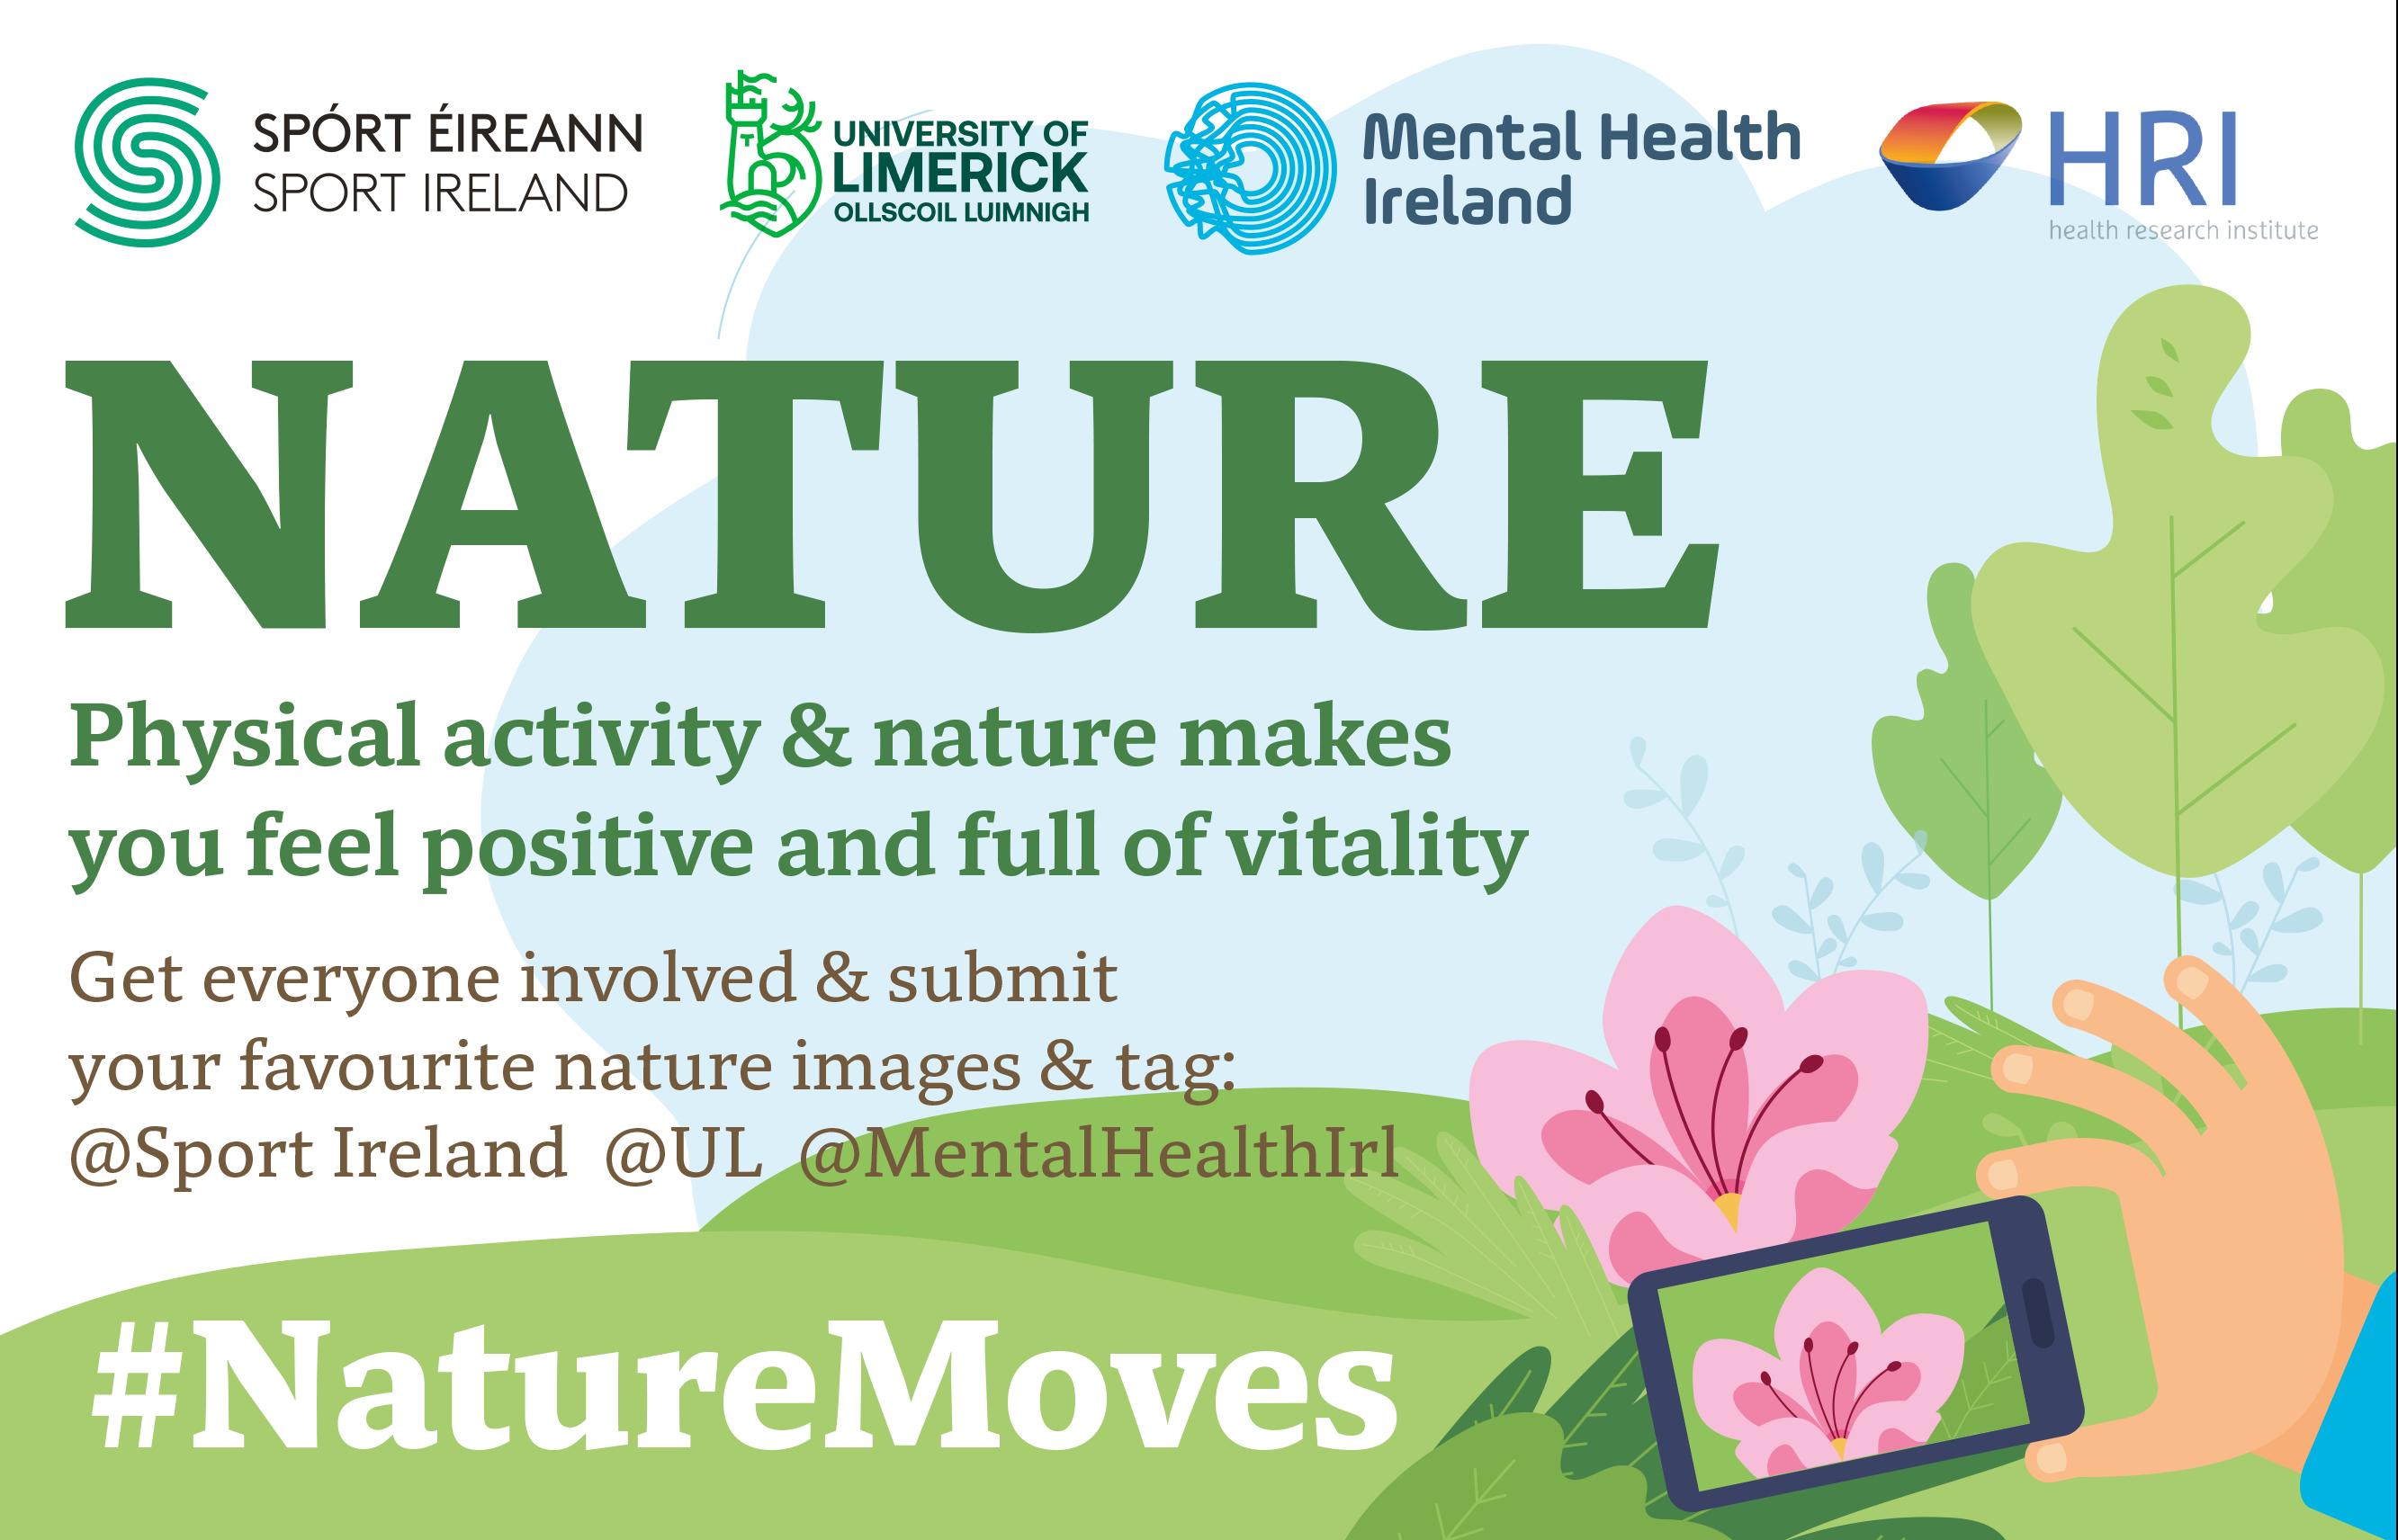 Tag SportIreland in your nature photos and use the hashtag #naturemoves